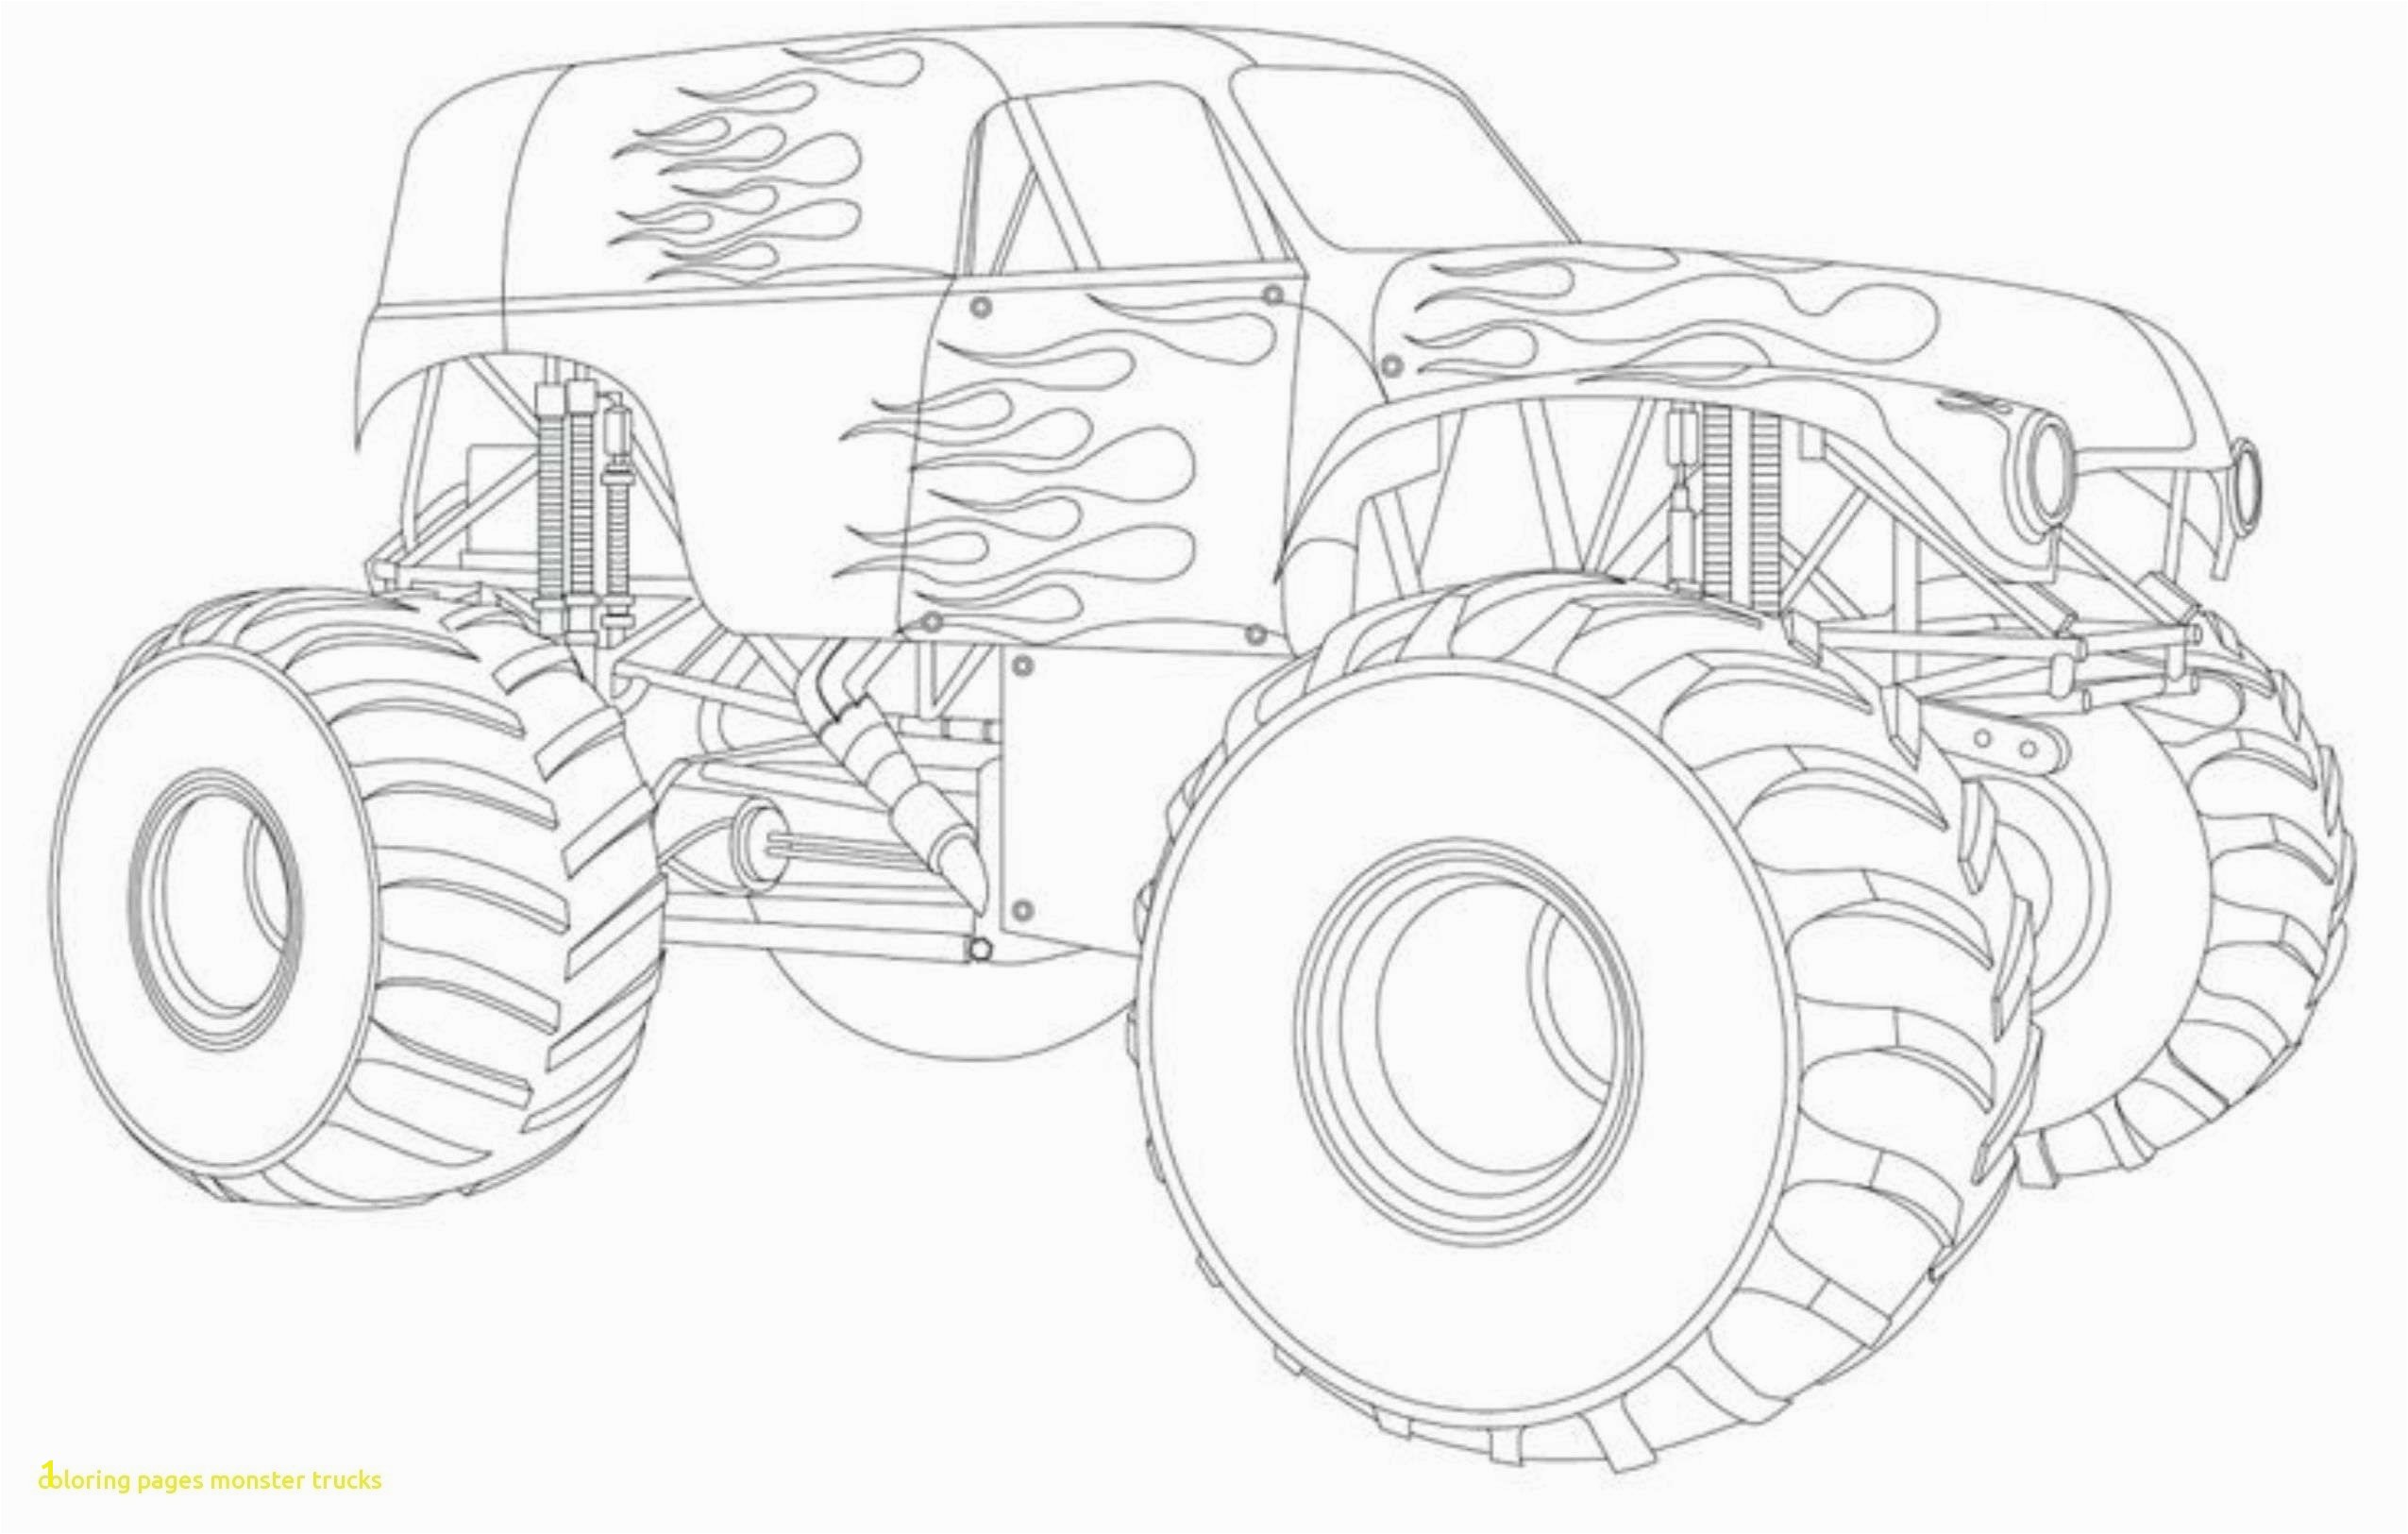 Od Sand Coloring Page Monster Truck Printable Coloring Pages New Mississippi Coloring Pages Coloring Pages Coloring Pages